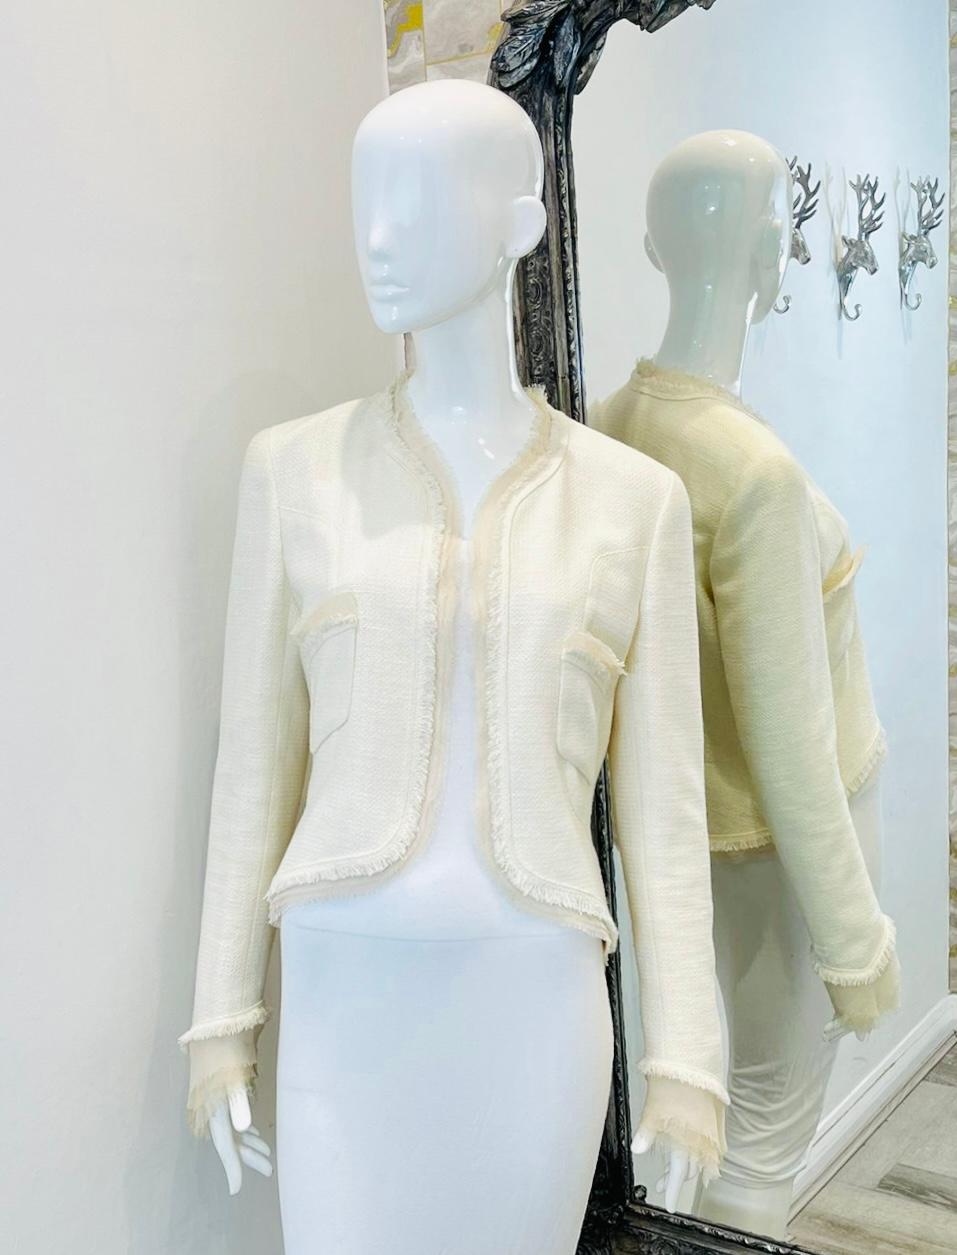 Chanel Silk Fringe Trimmed Cotton Jacket

Ivory open jacket designed with tonal triple layer silk and fringe trims.

Detailed with high-low hem, long sleeves and open pockets to the sides.

From 2004 Cruise Collection.

Size – 42FR

Condition – Very